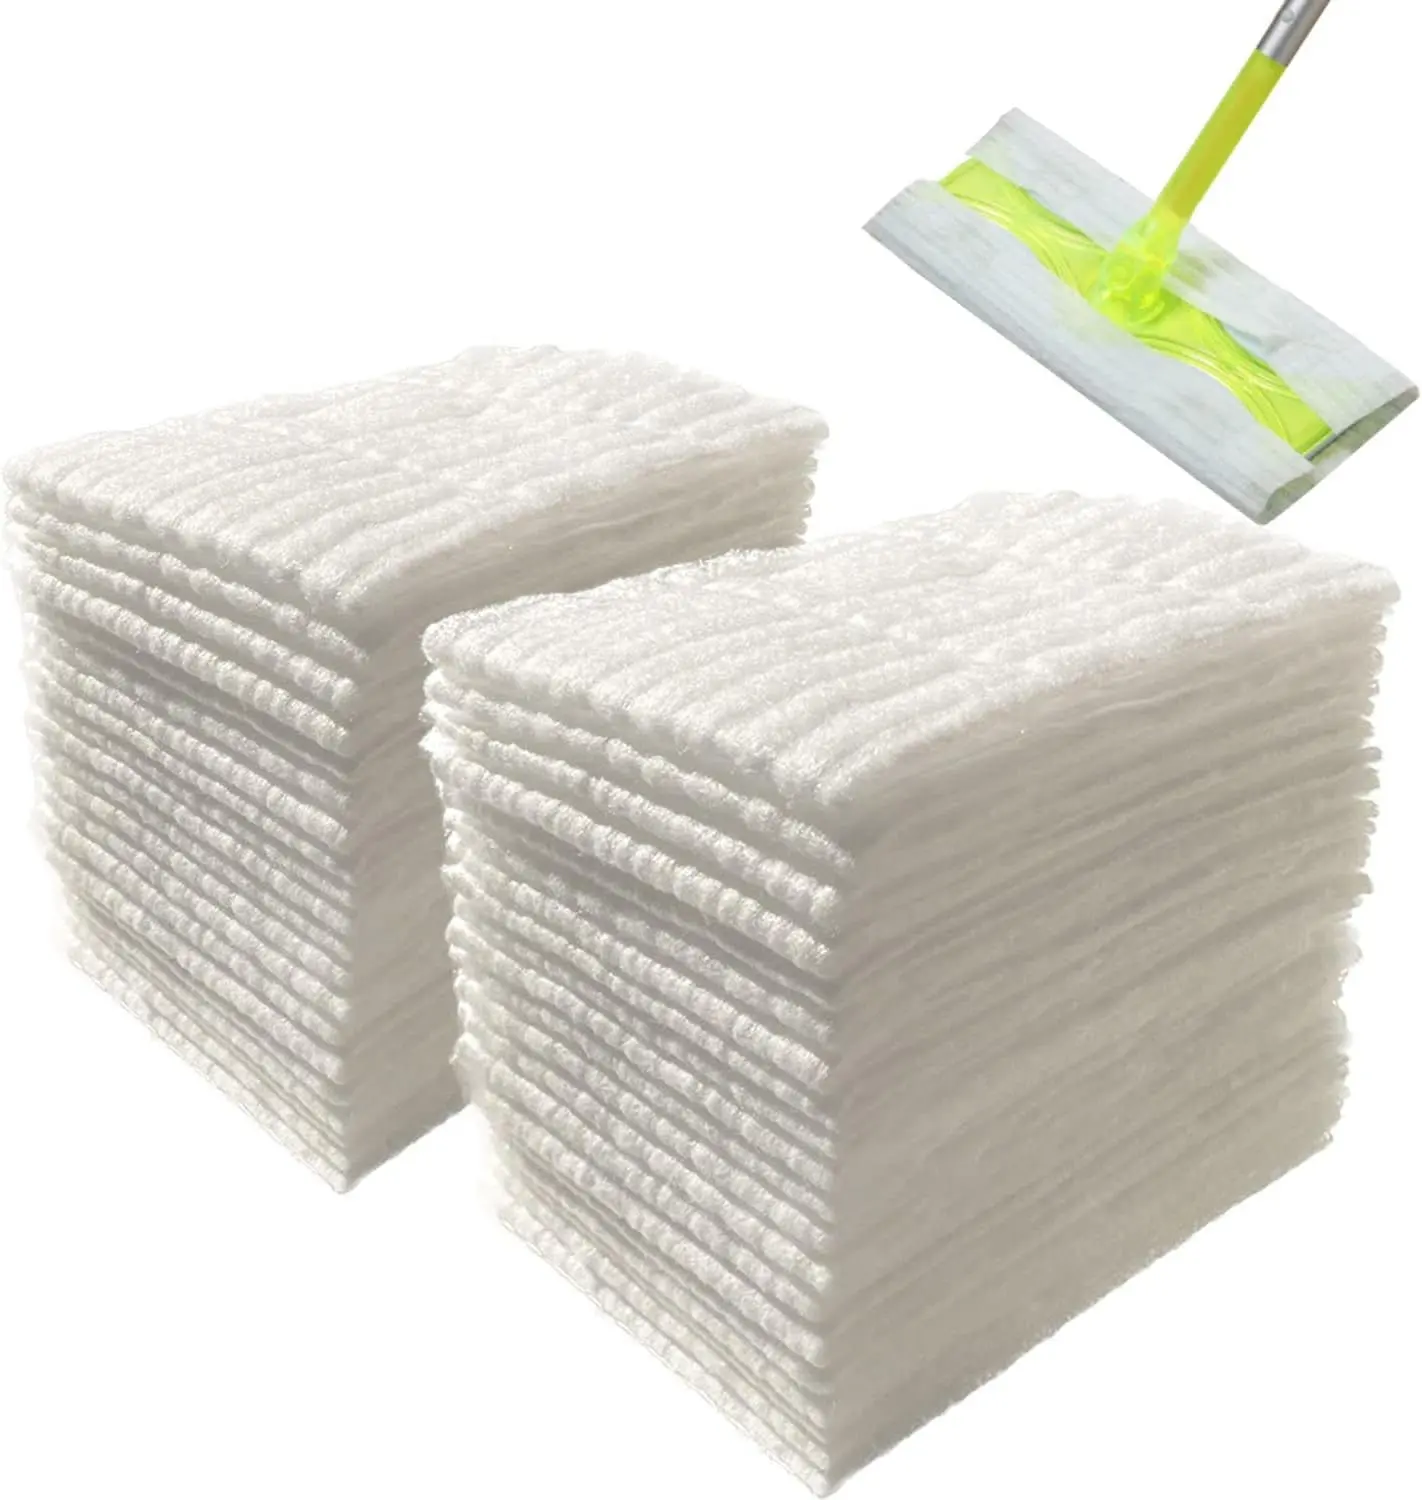 Dry Sweeping Cloths Dry Mop Refills Sweeper Dusting Cloths Disposable Duster Refills Mop Pads Floor Electrostatic Cloths